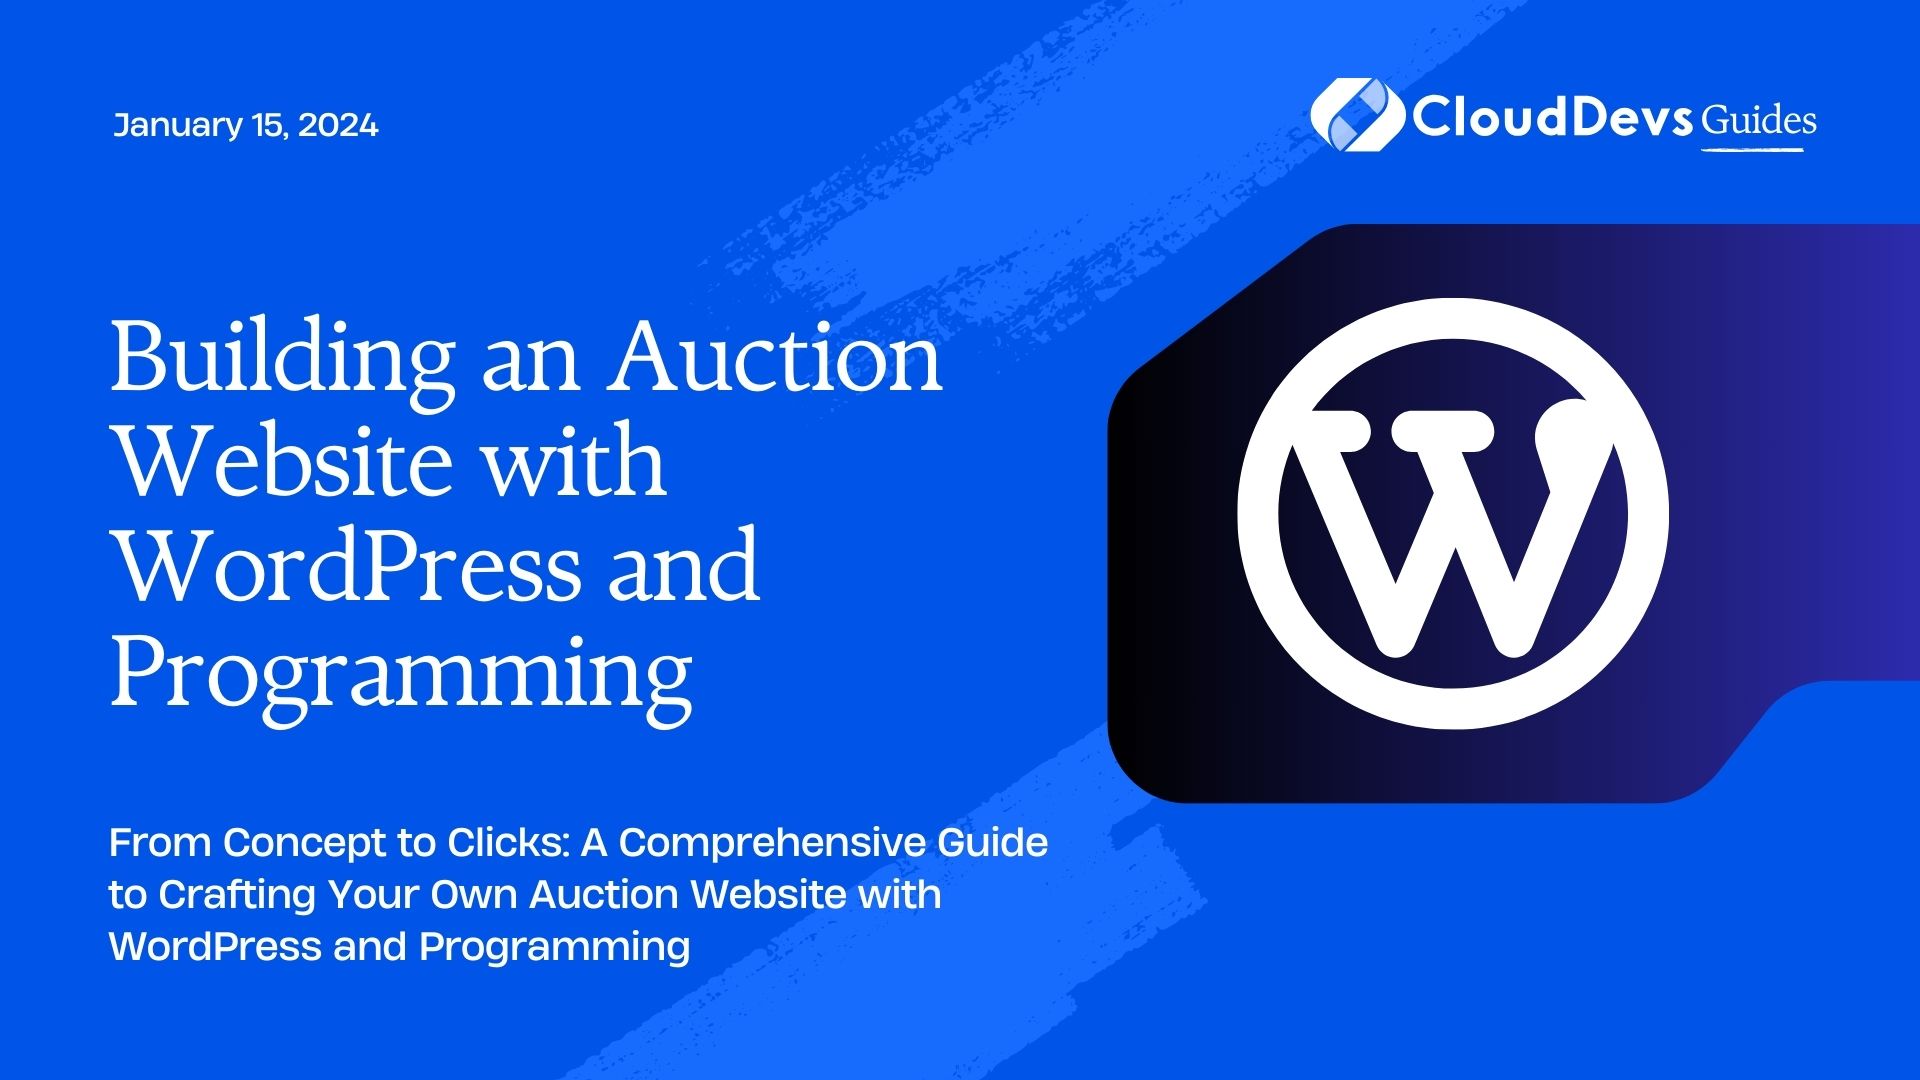 Building an Auction Website with WordPress and Programming